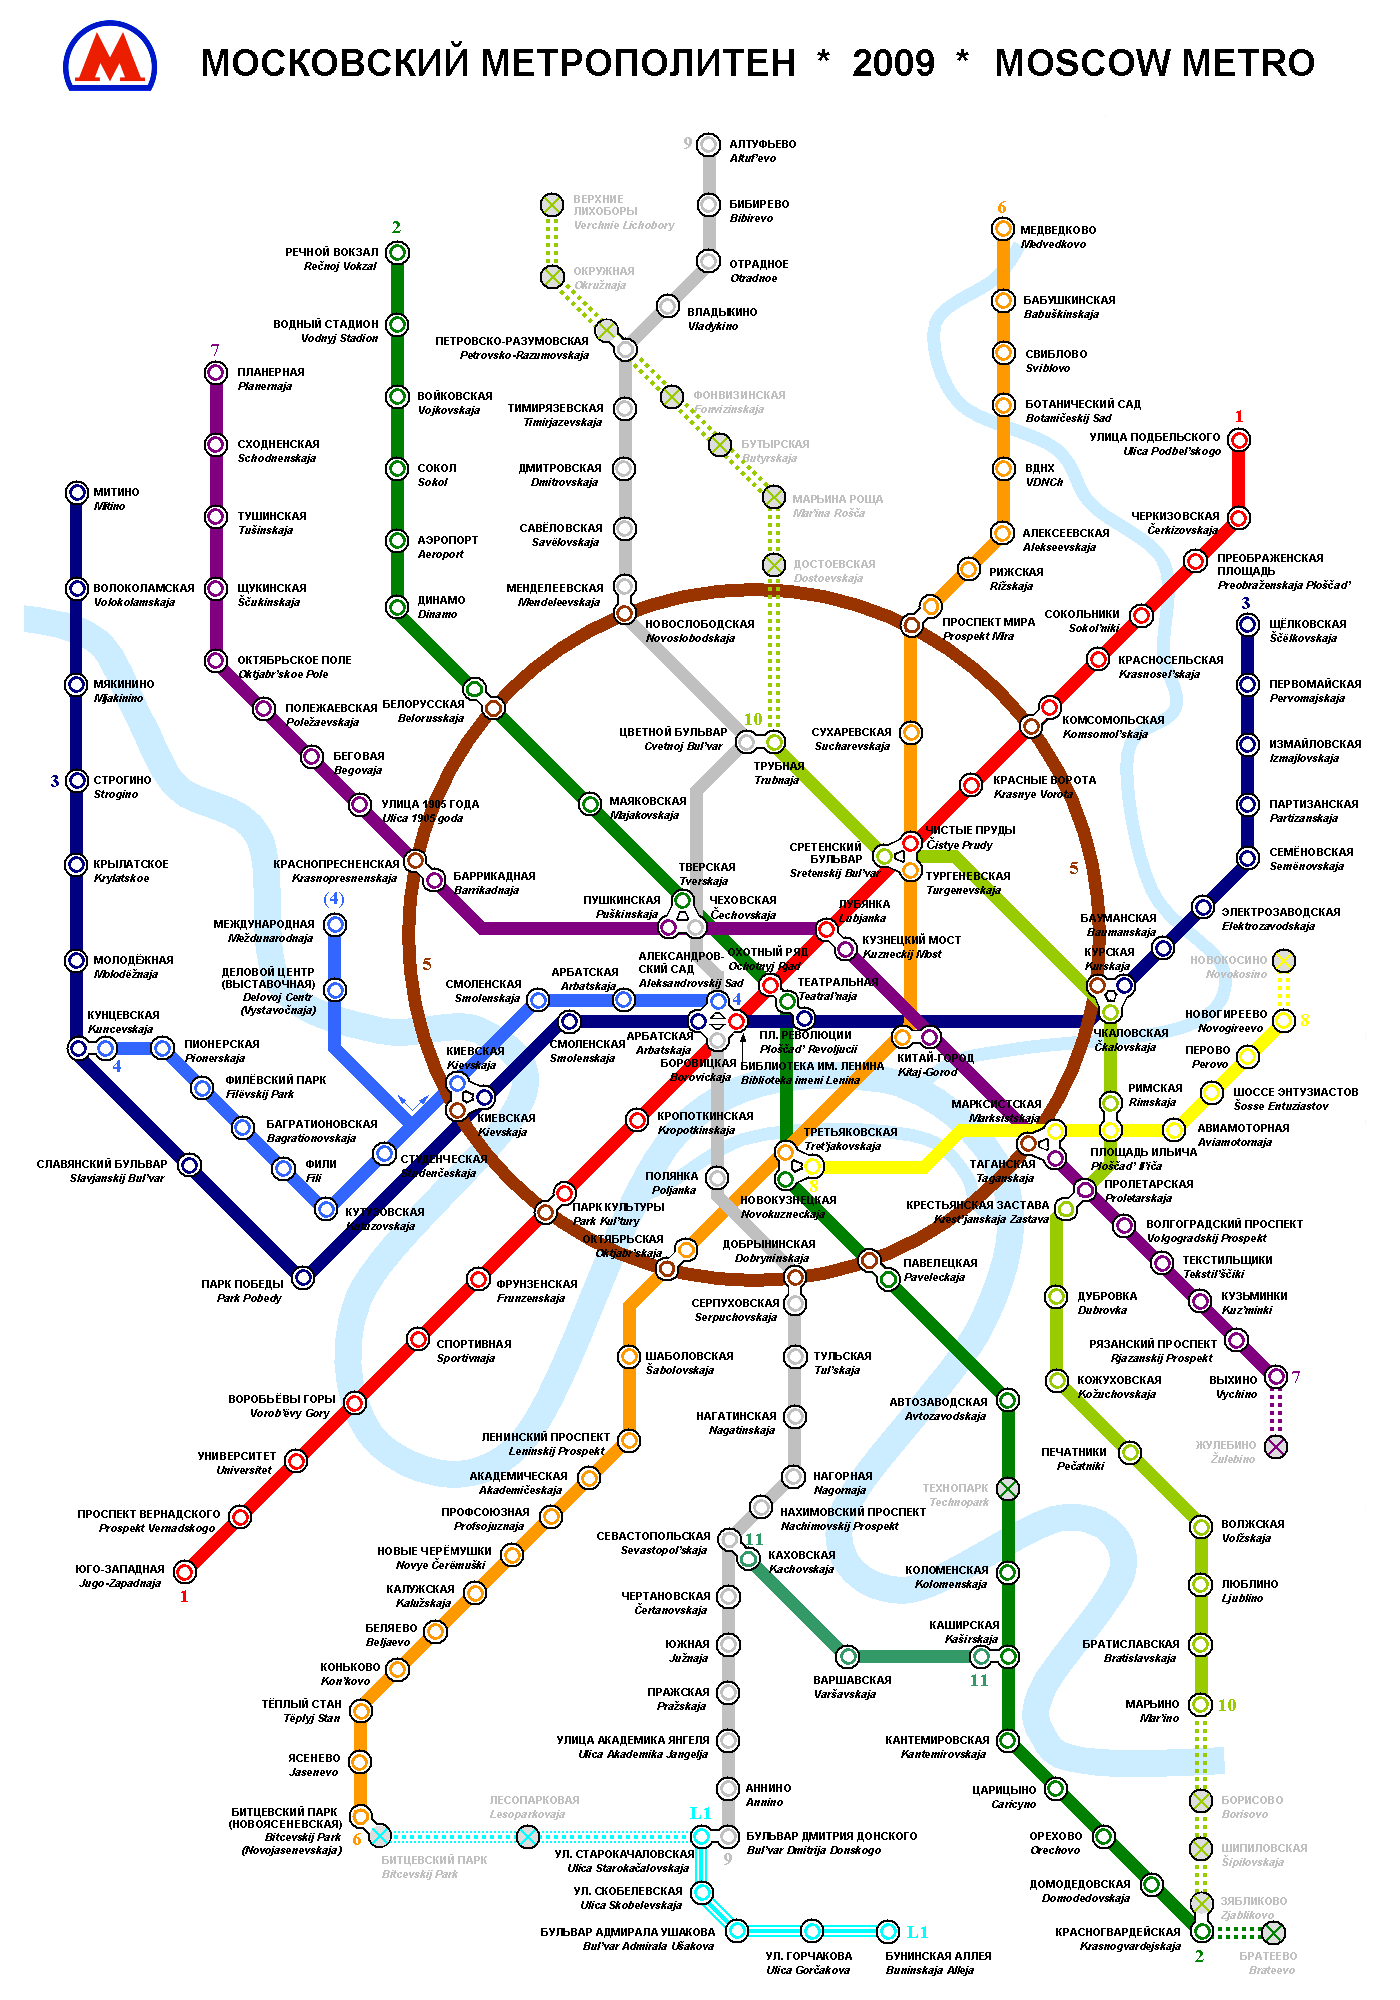 File Moscow Metro Map 2009 png Wikimedia Commons